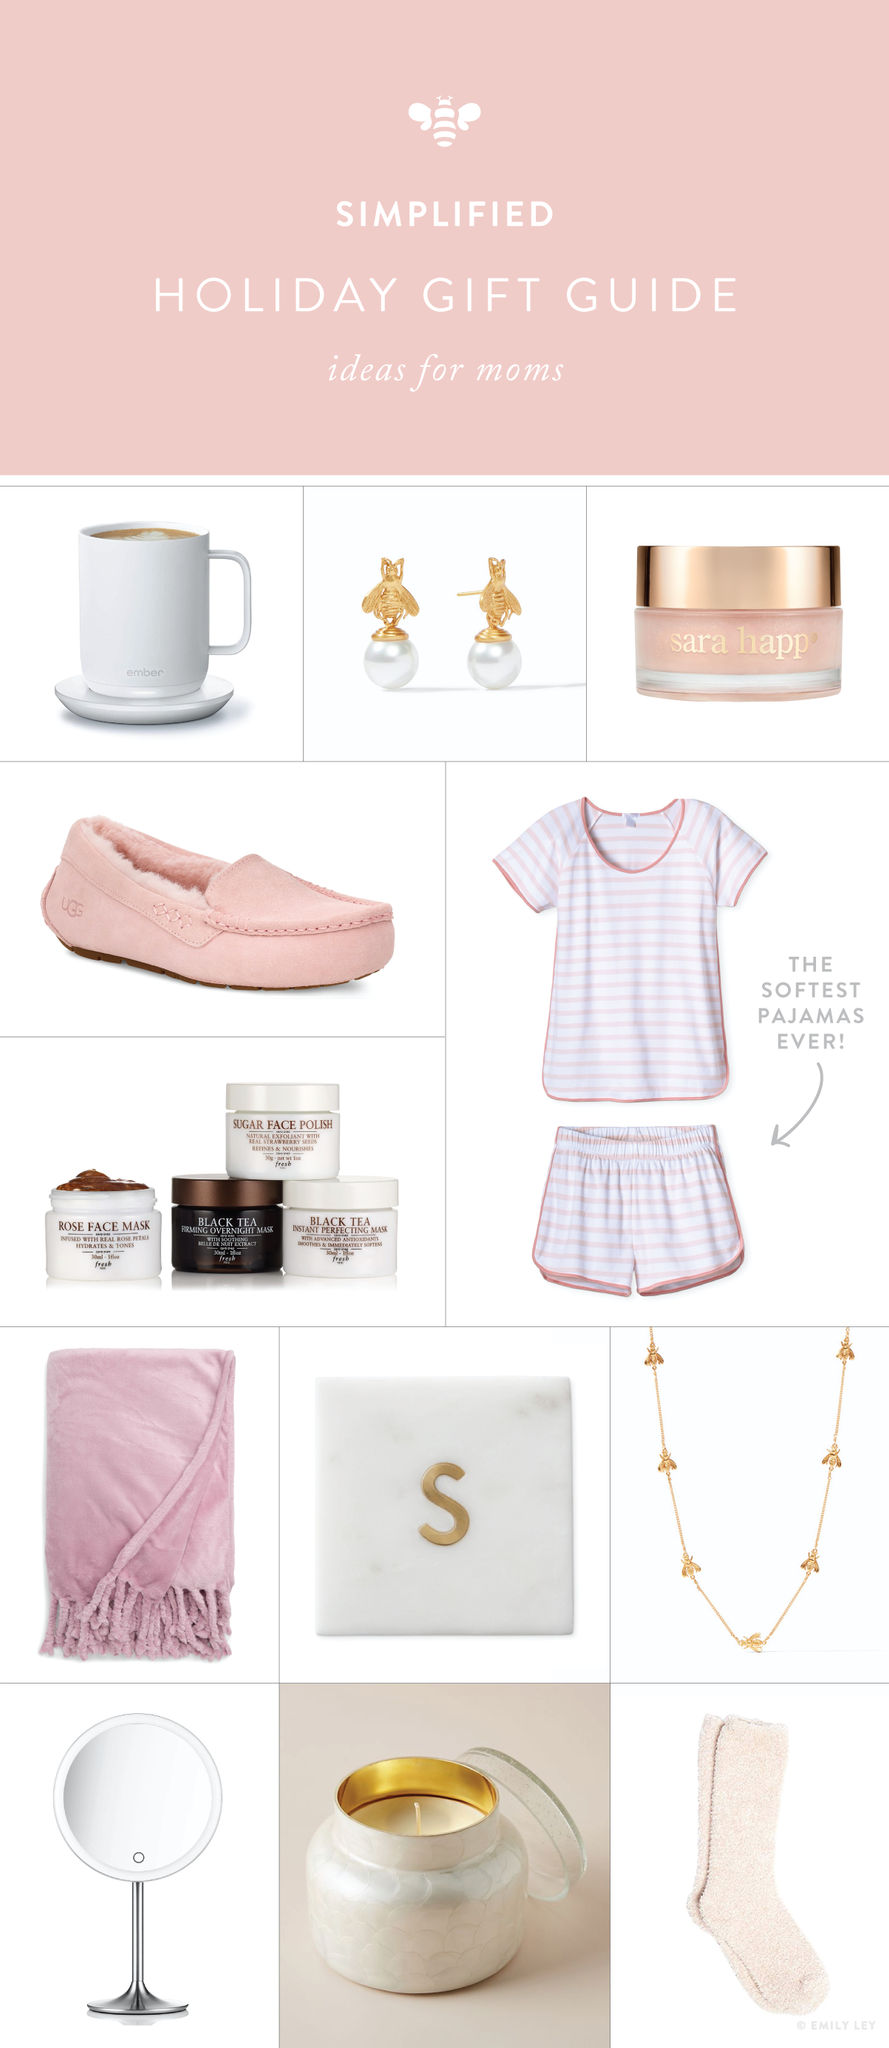 https://cdn.shopify.com/s/files/1/0157/9972/files/Simplified-2019-Gift-Guide-For-Moms_2048x2048.png?v=1574781861